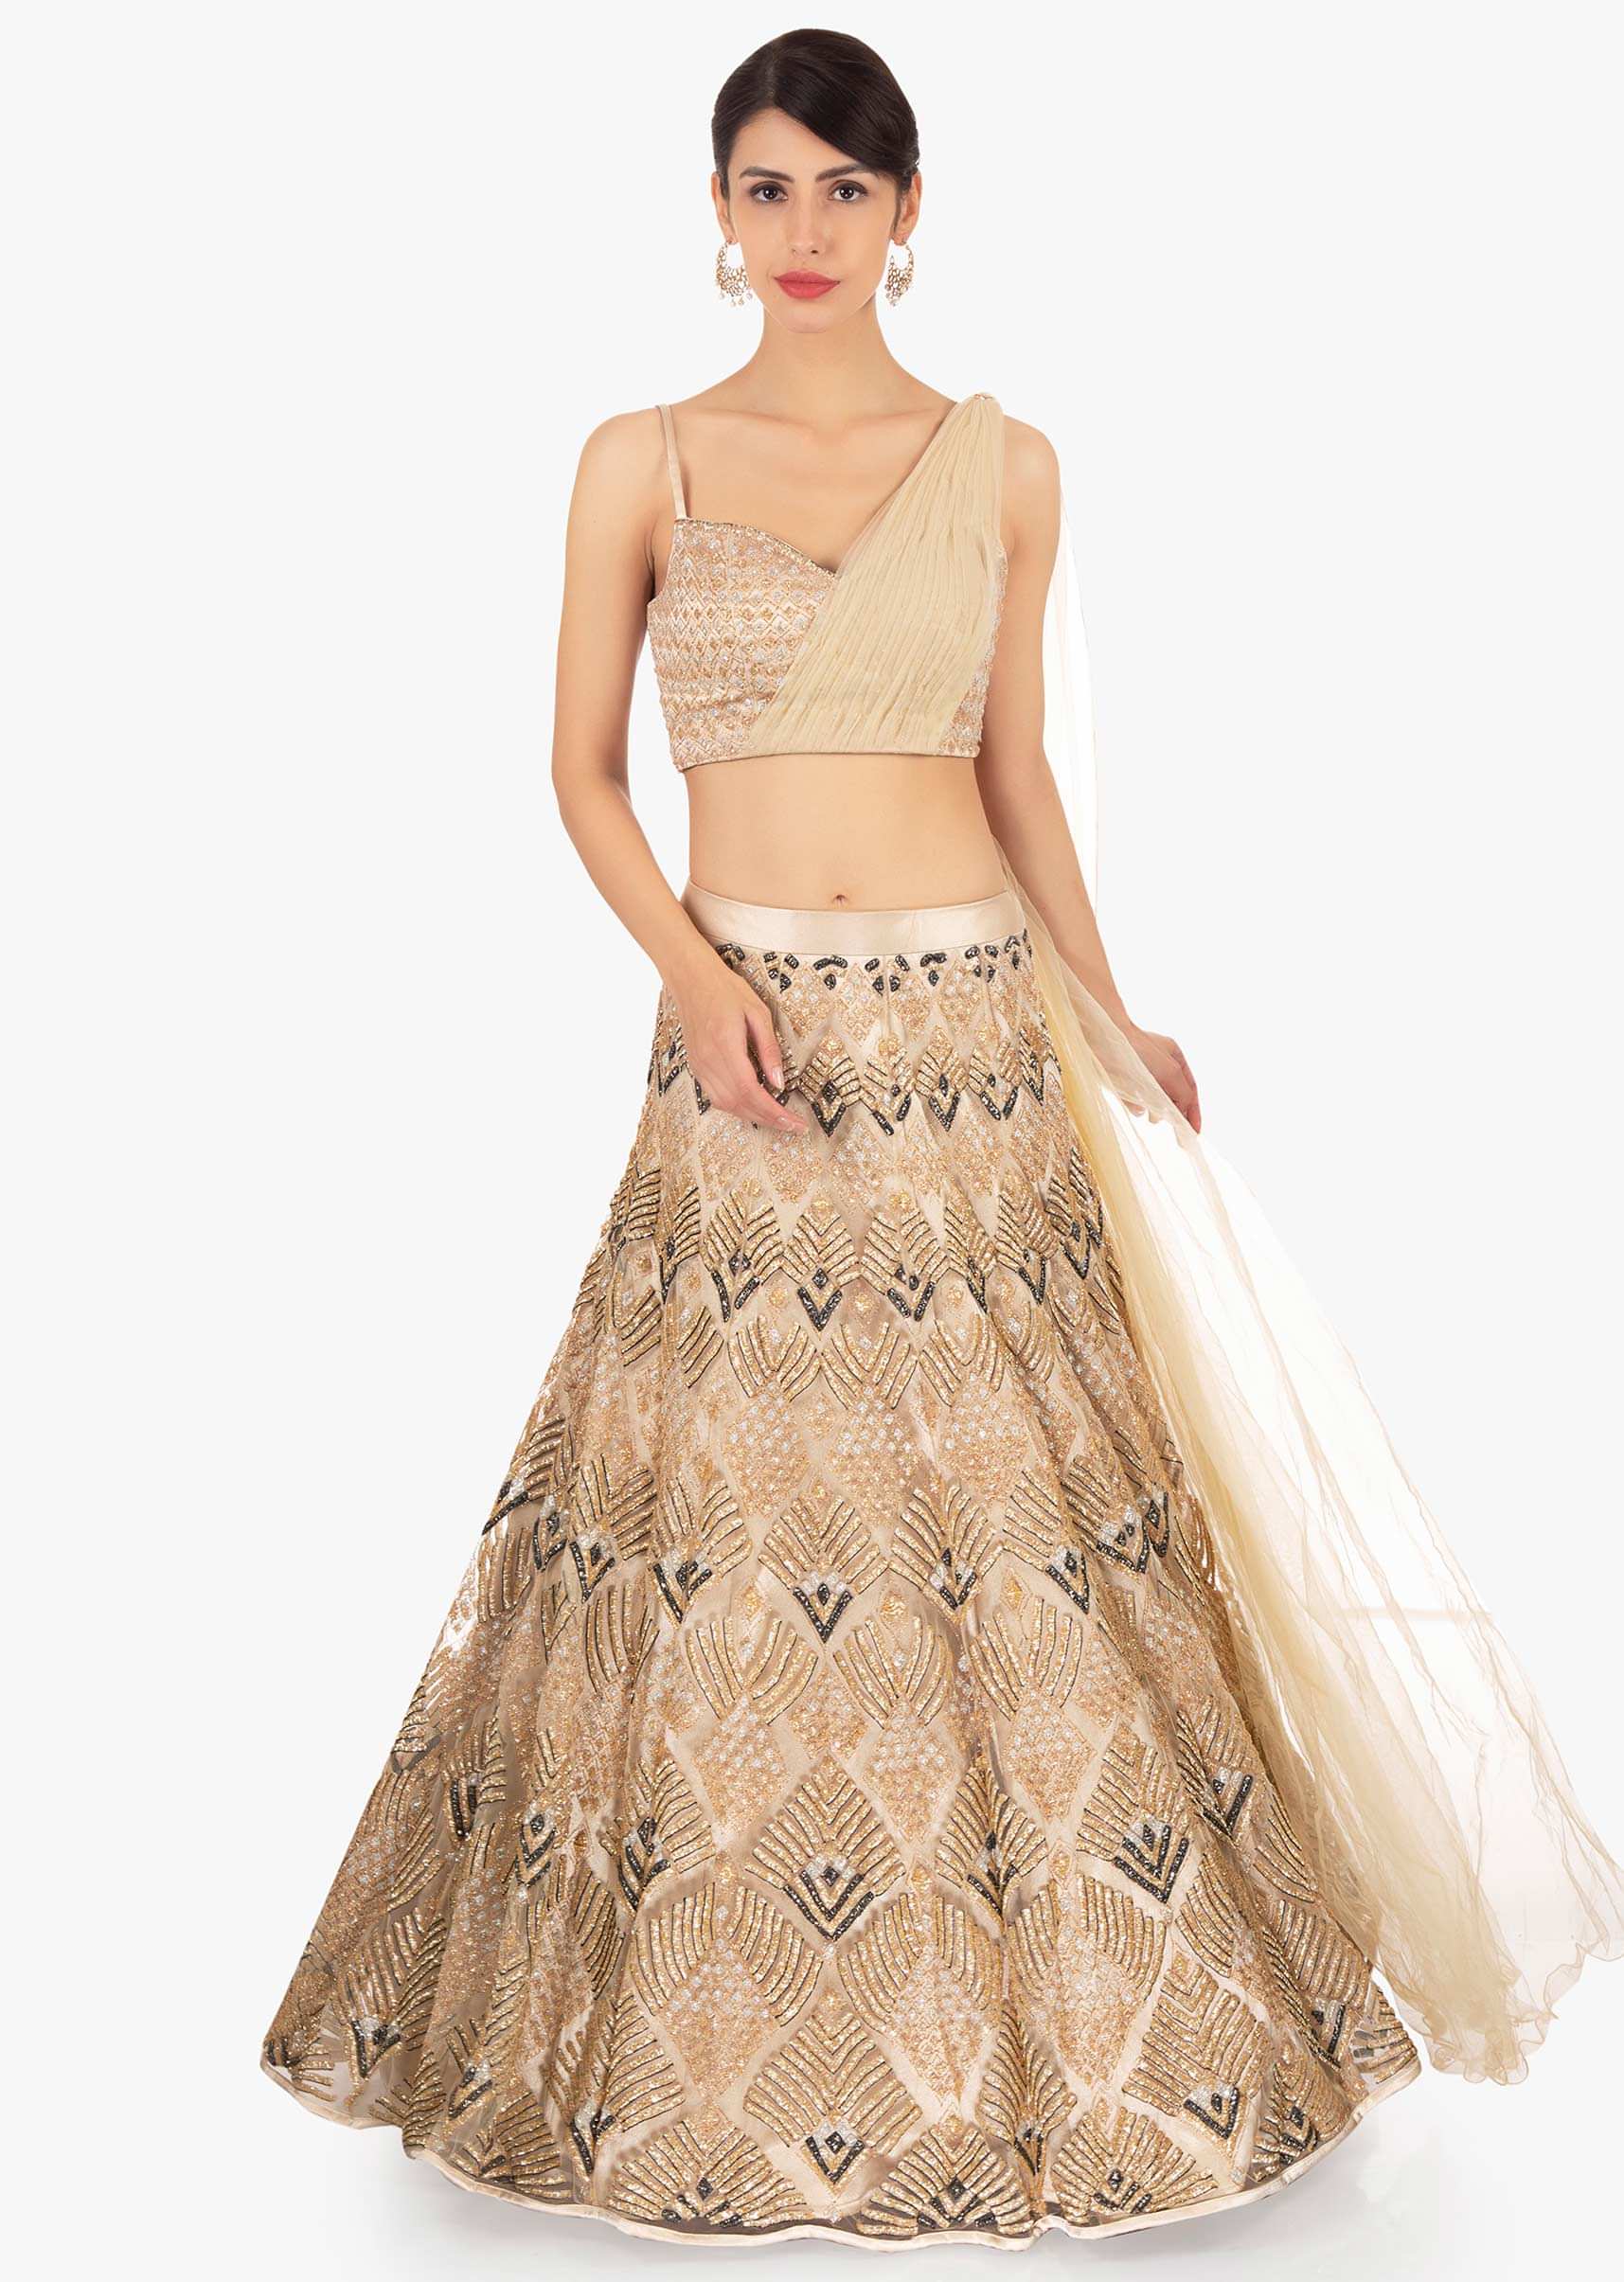 Gold net lehenga in geometric motif paired with a strap top with preattached net dupatta